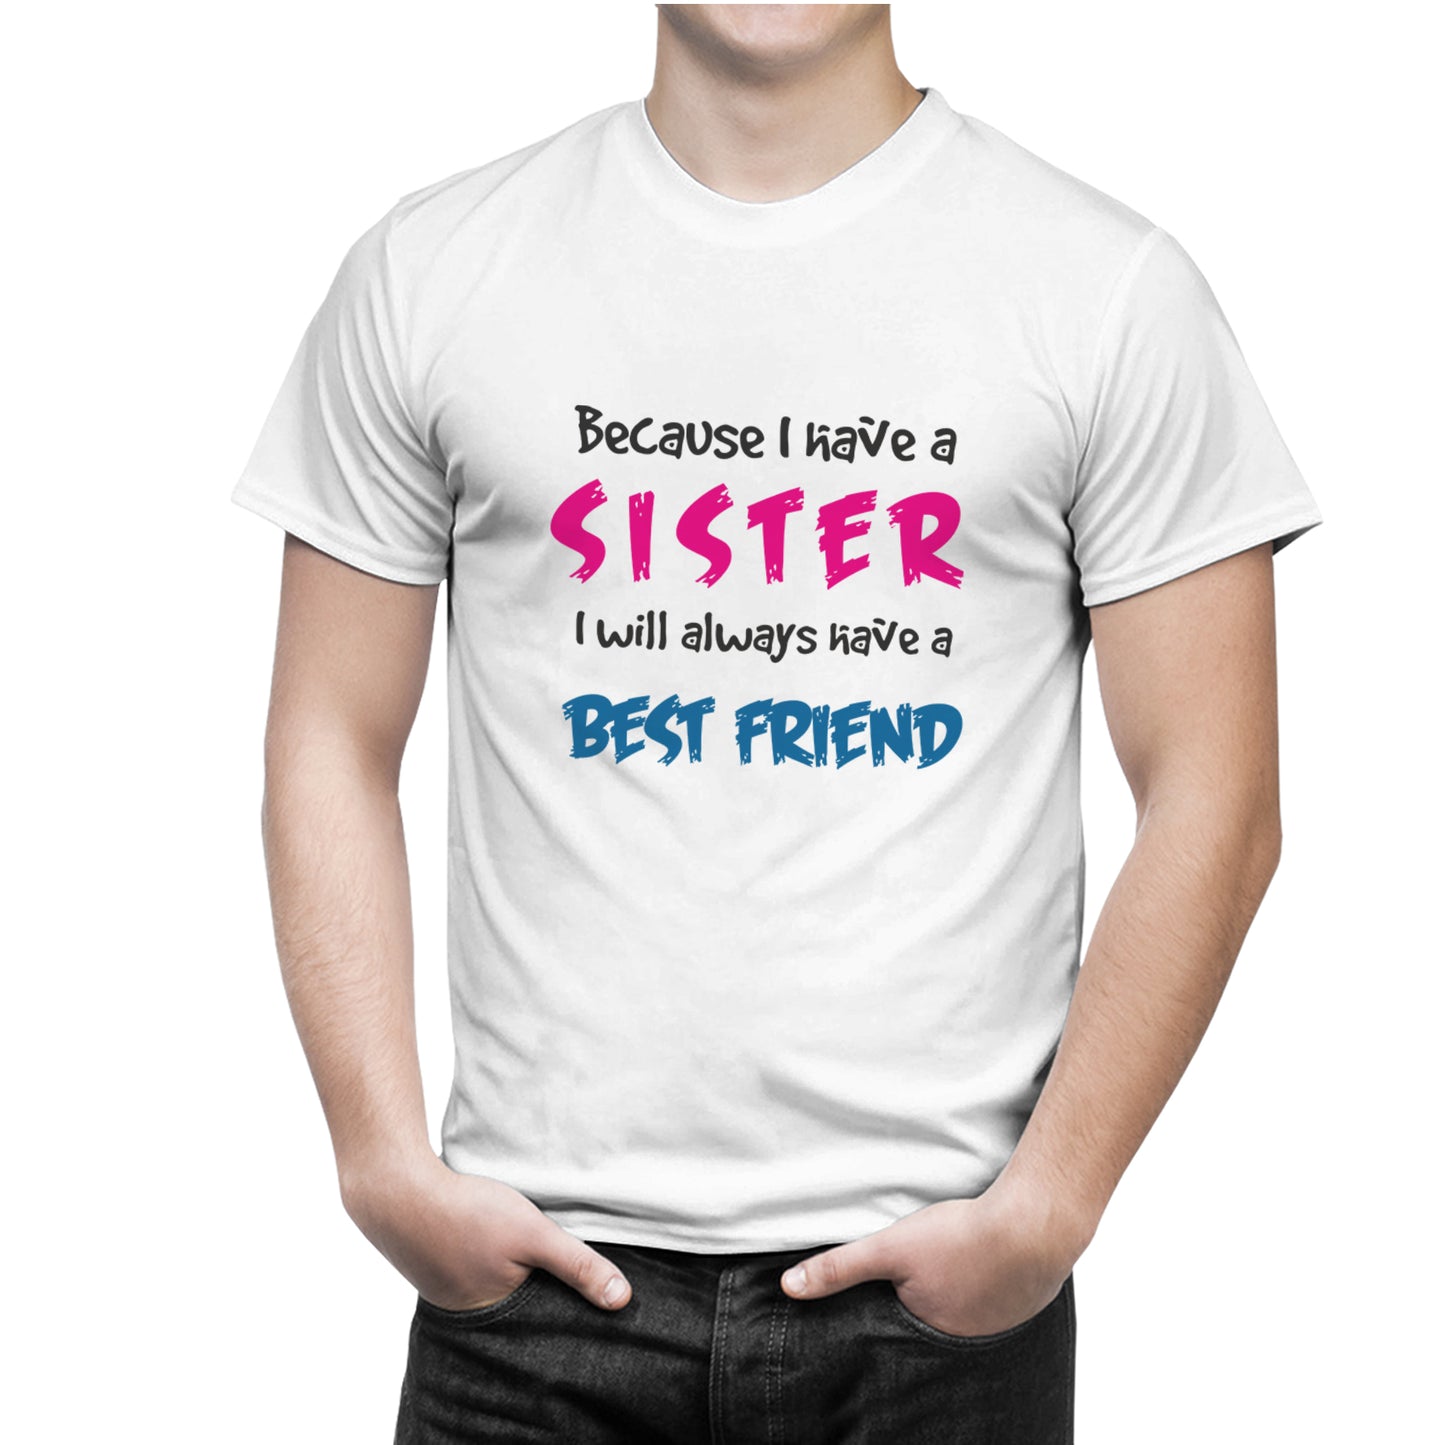 I have a sister,will always have a best friend- I have a brother,will always have a best friend matching Sibling t shirts - white